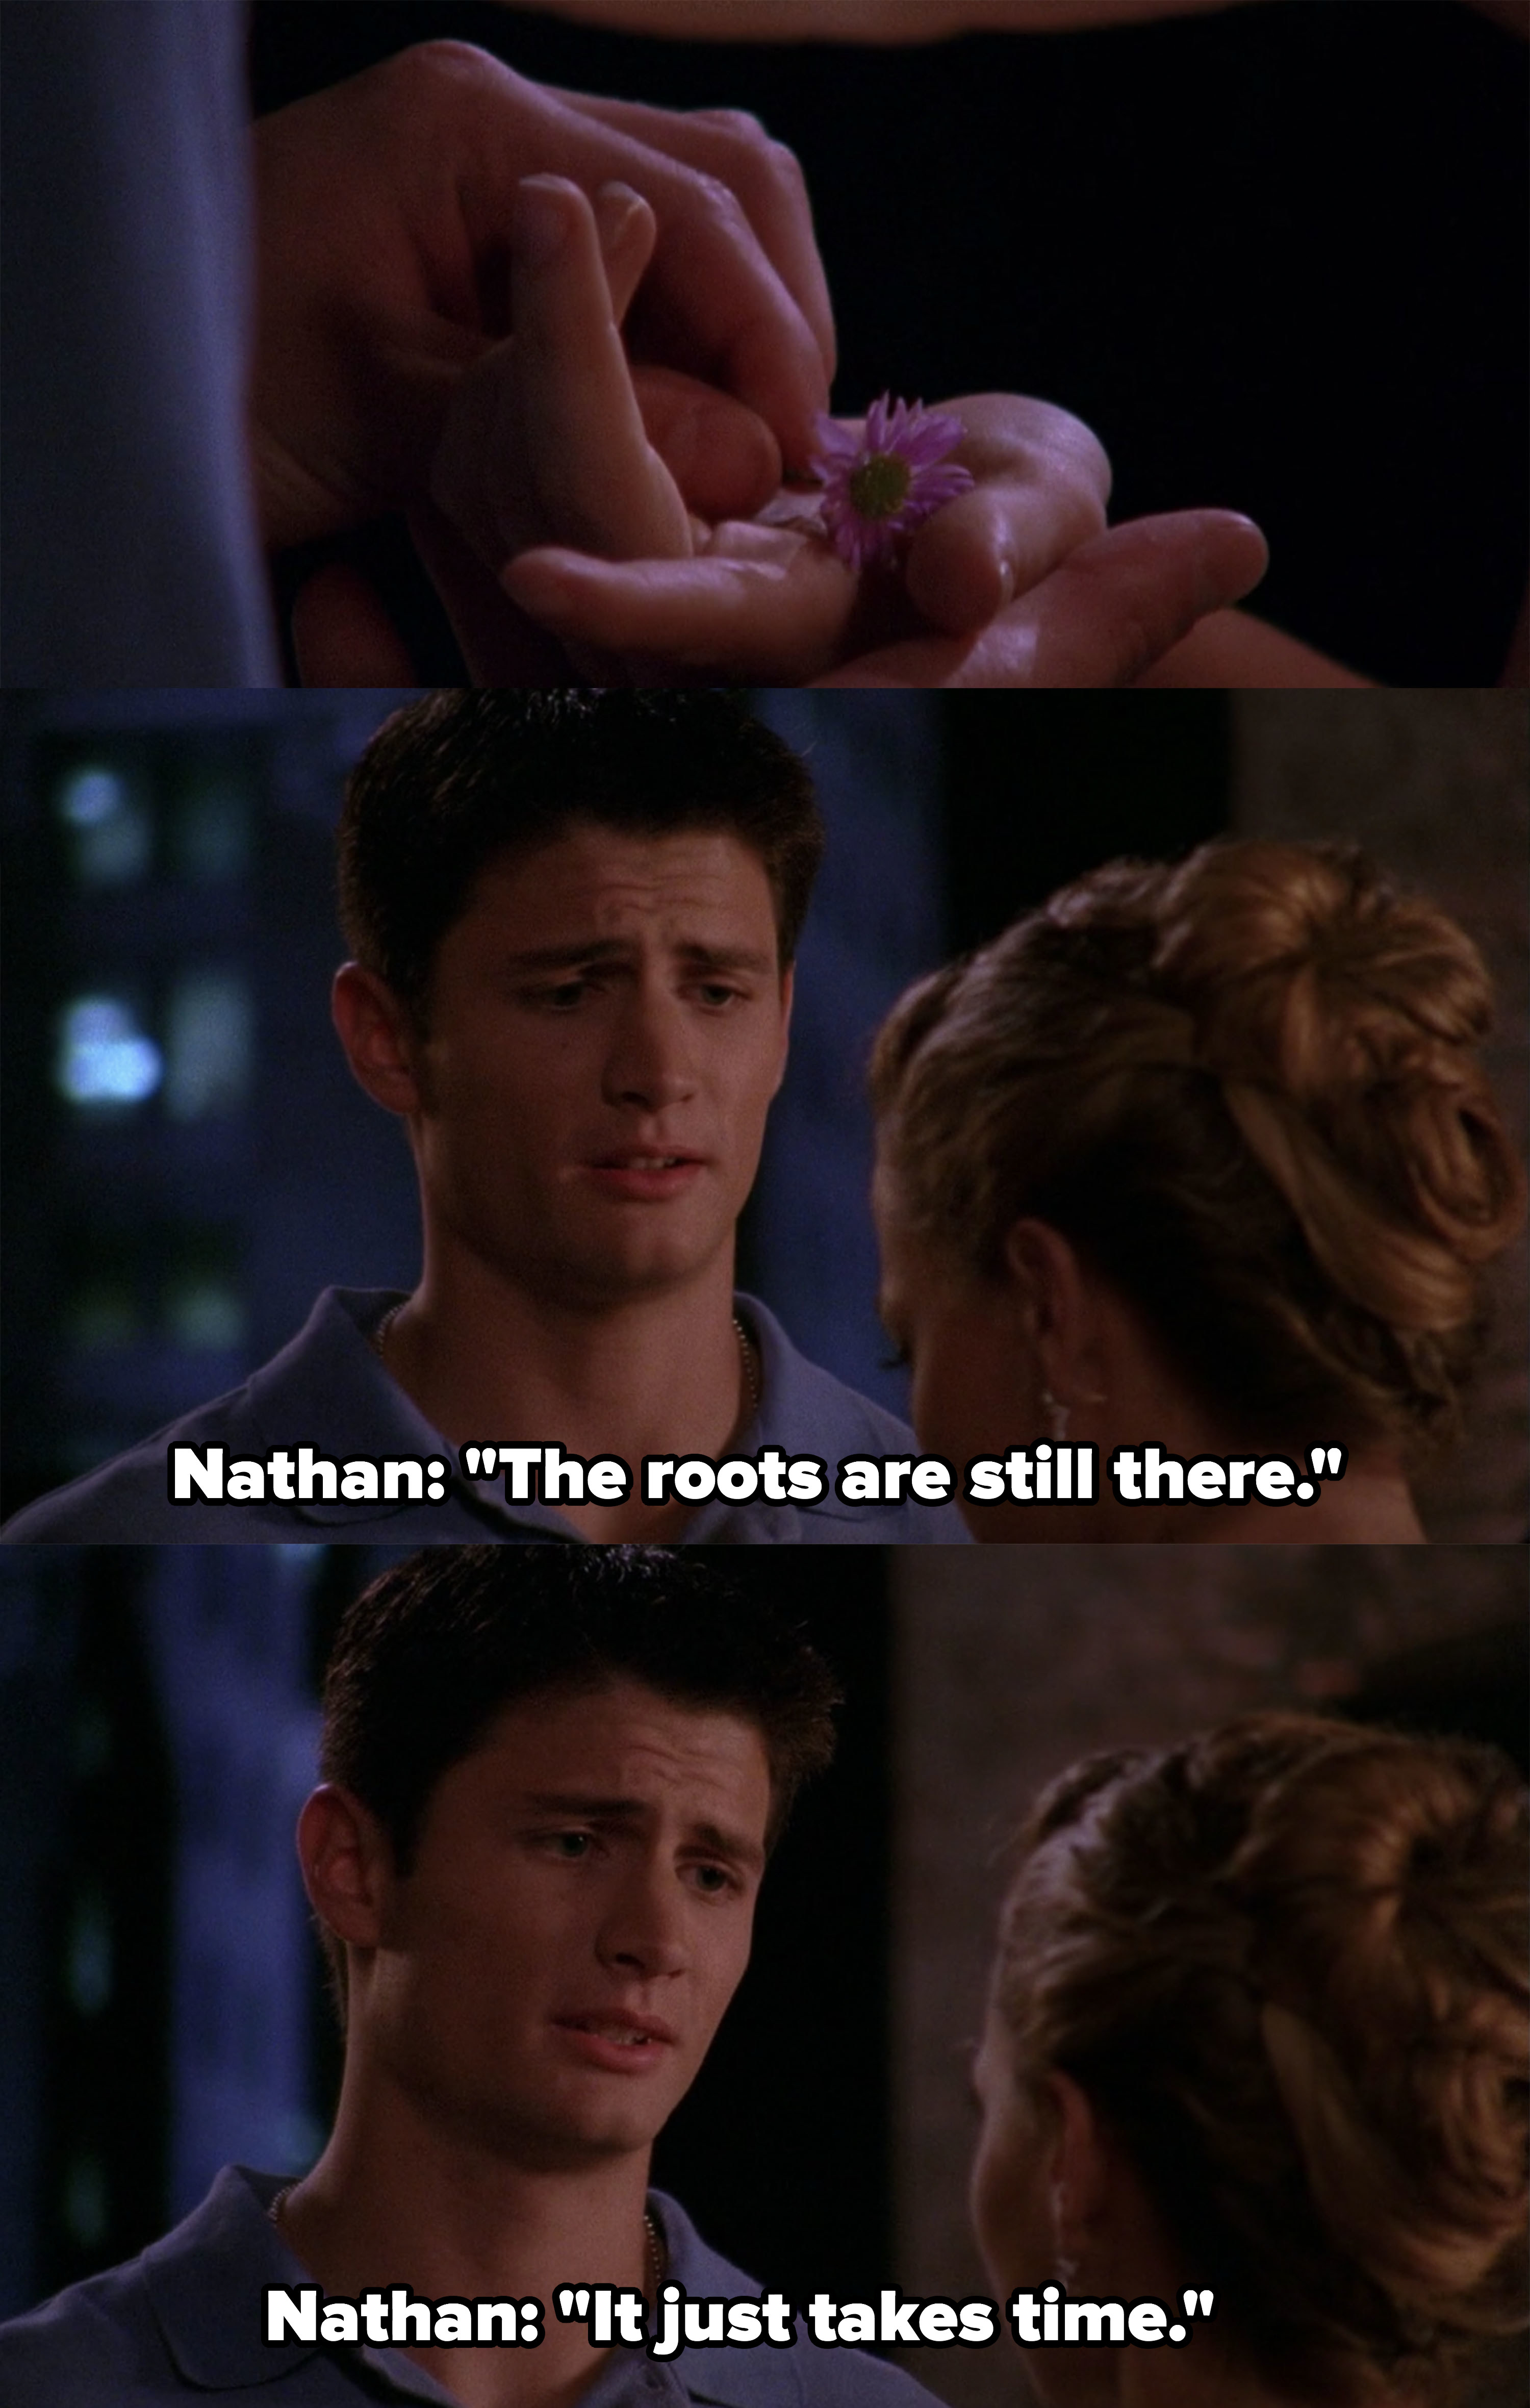 Nathan hands Haley a flower and says the roots are still there, it just takes time